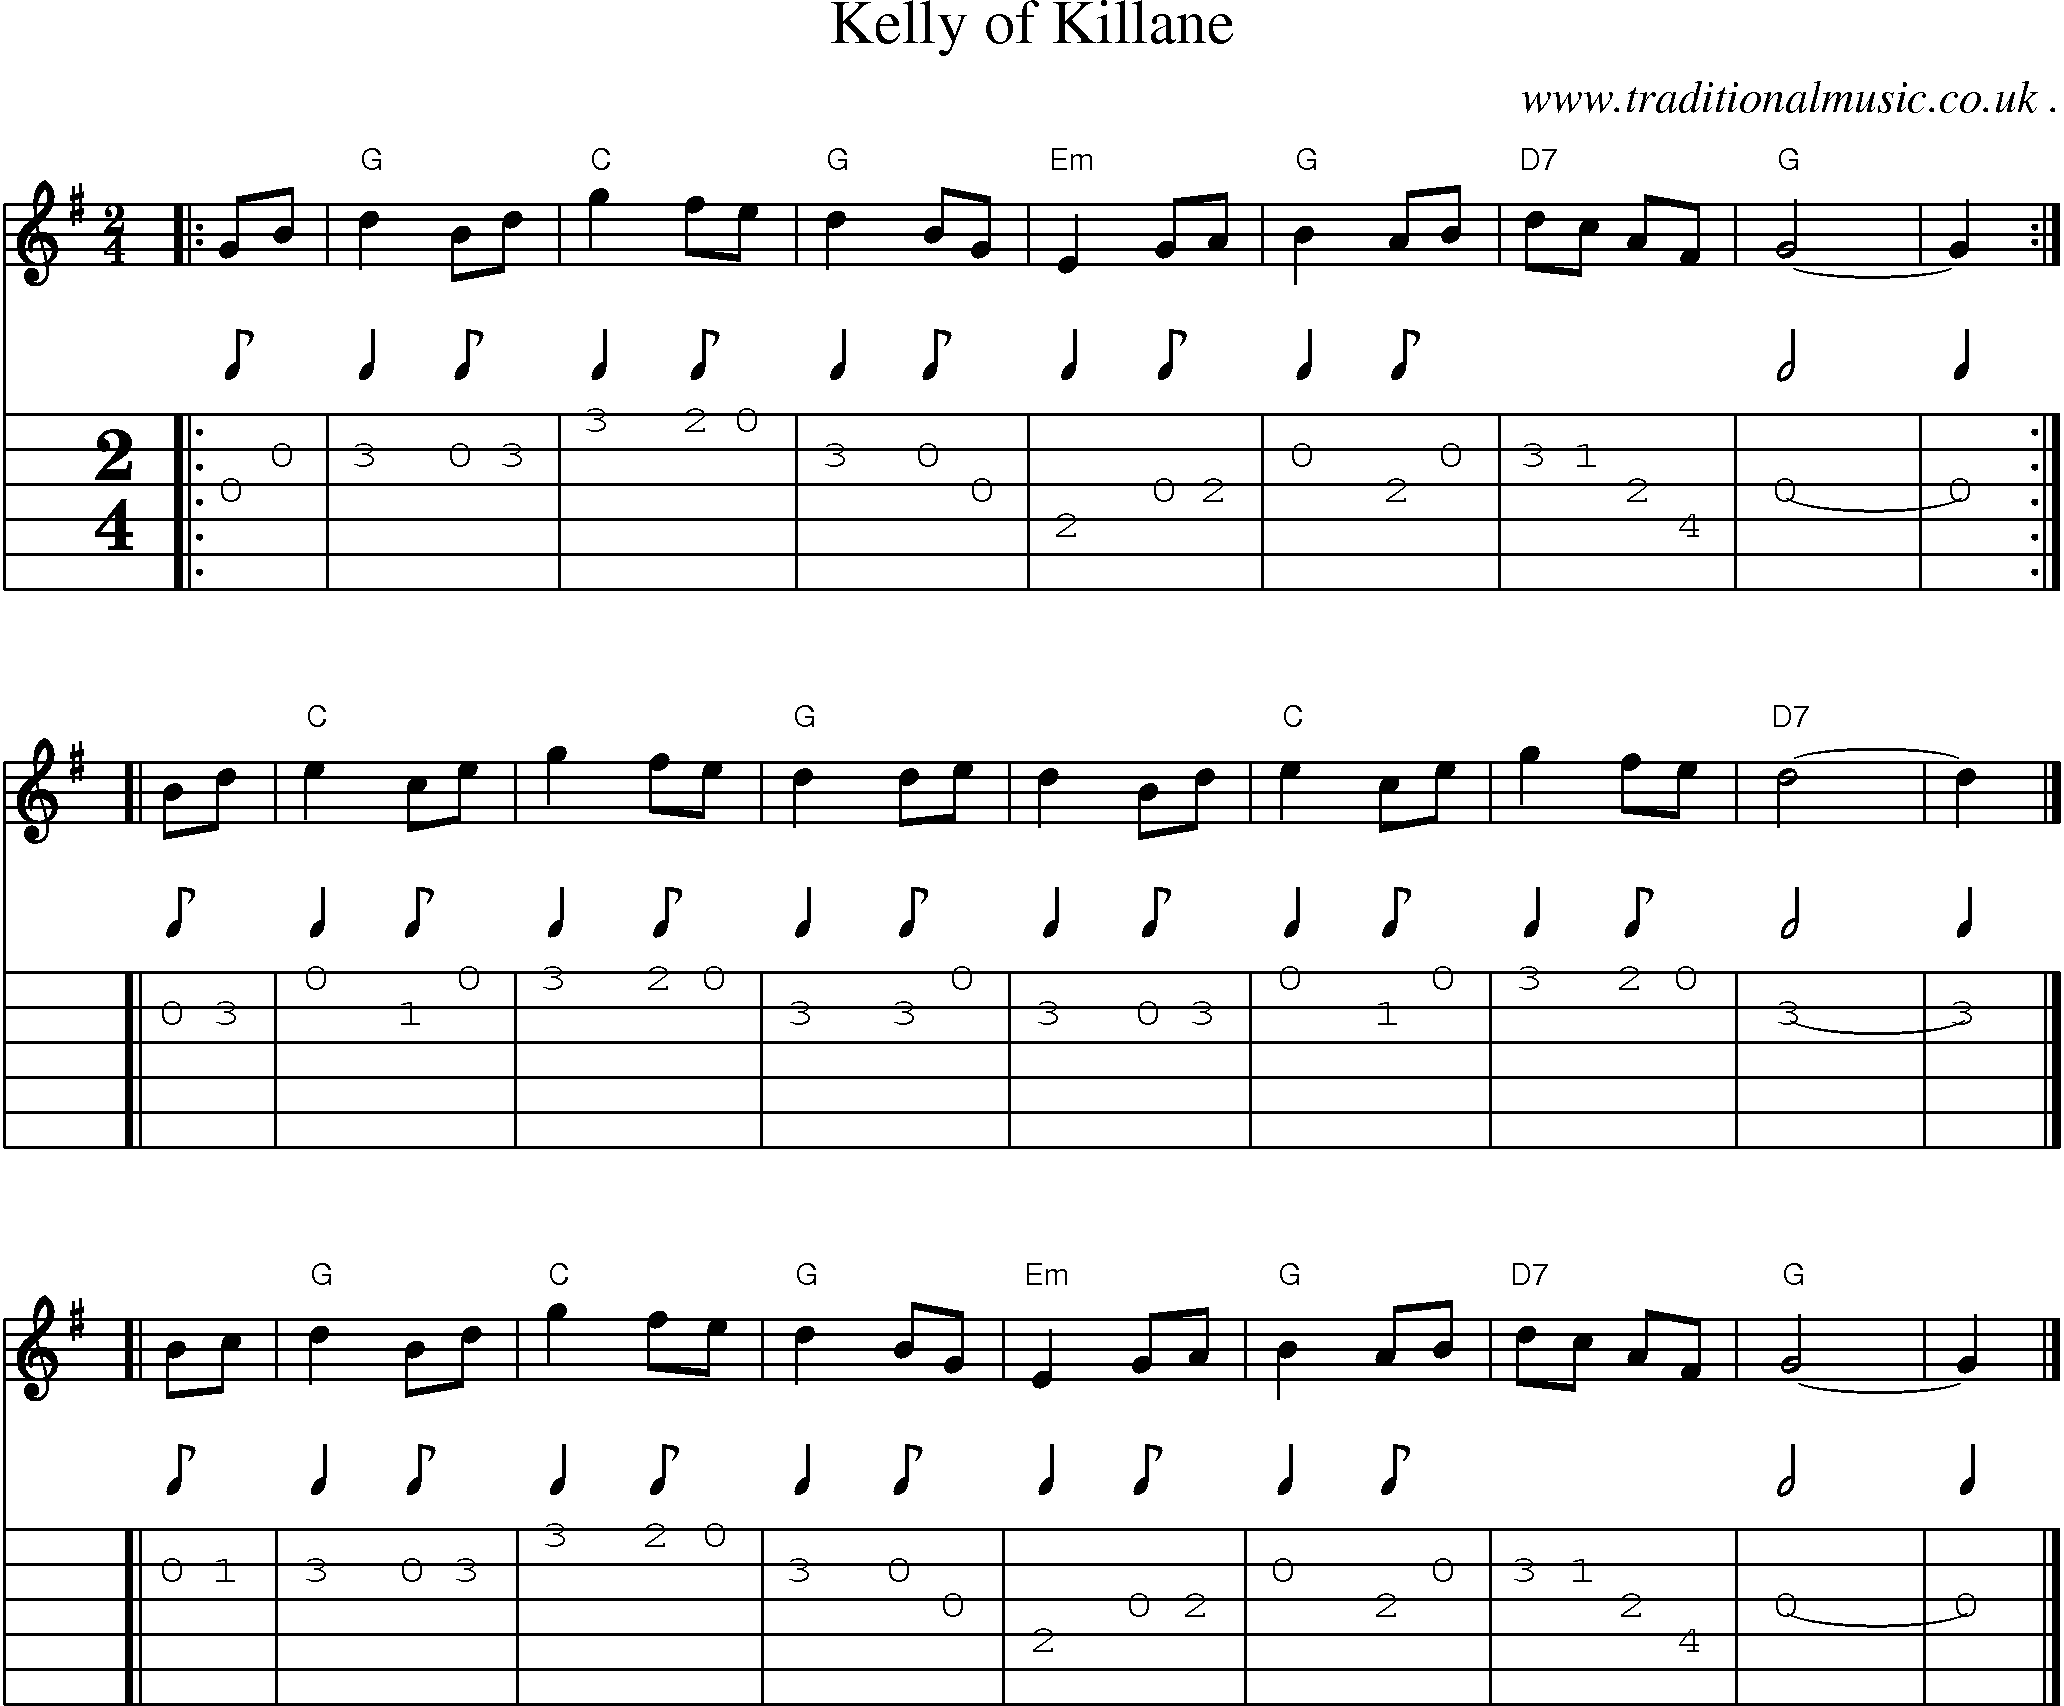 Sheet-music  score, Chords and Guitar Tabs for Kelly Of Killane